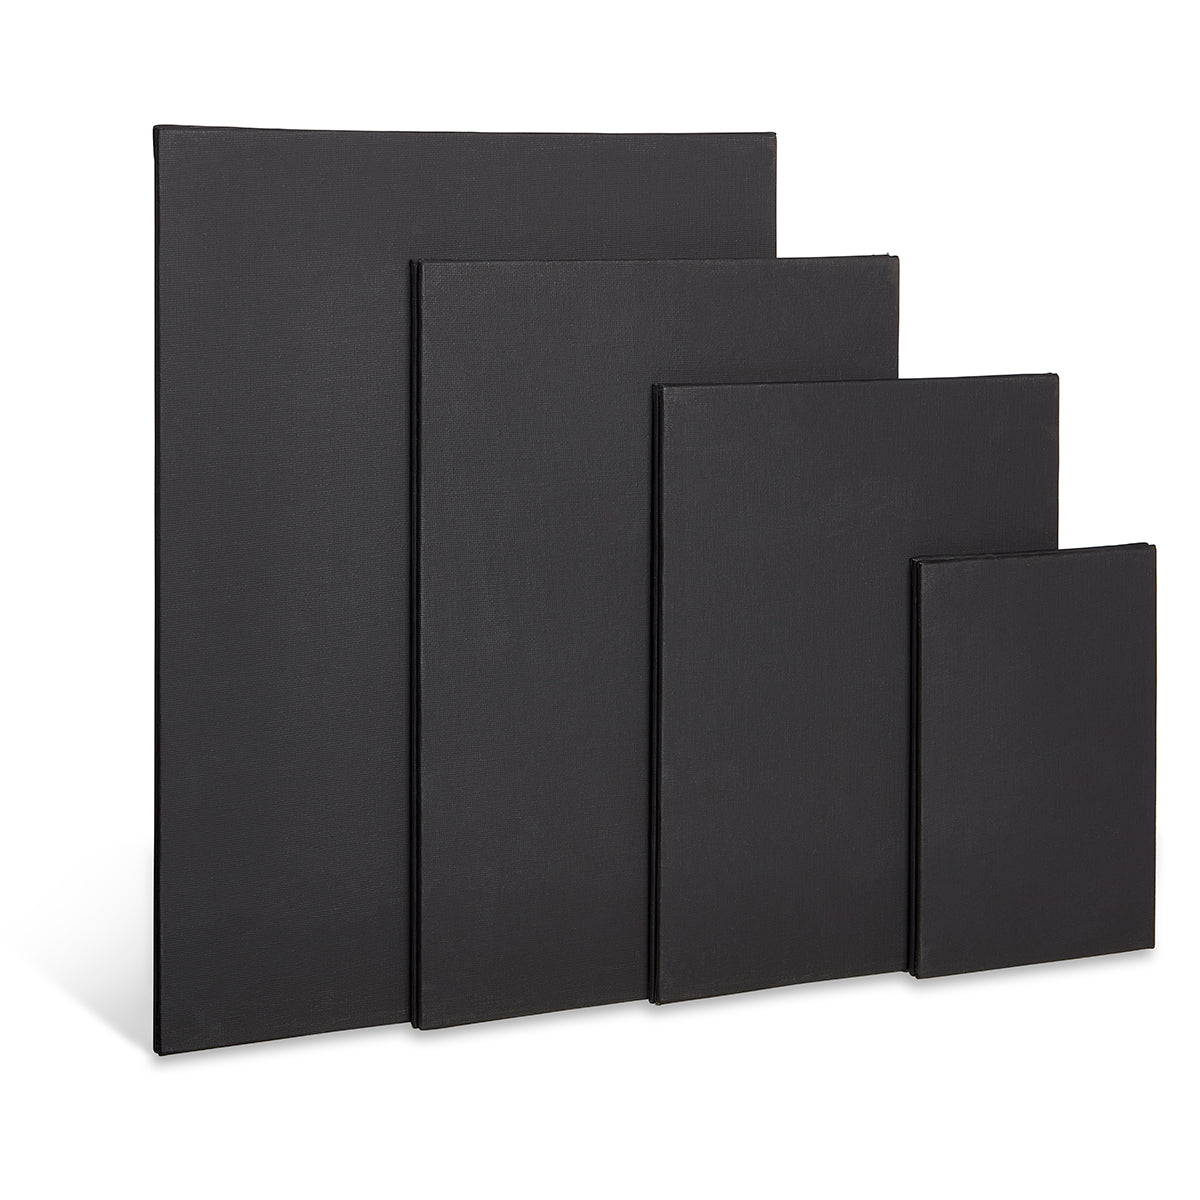 Square Stretched Canvas Multi-Pack - 4x4, 6x6, 8x8, 10x10, 12x12